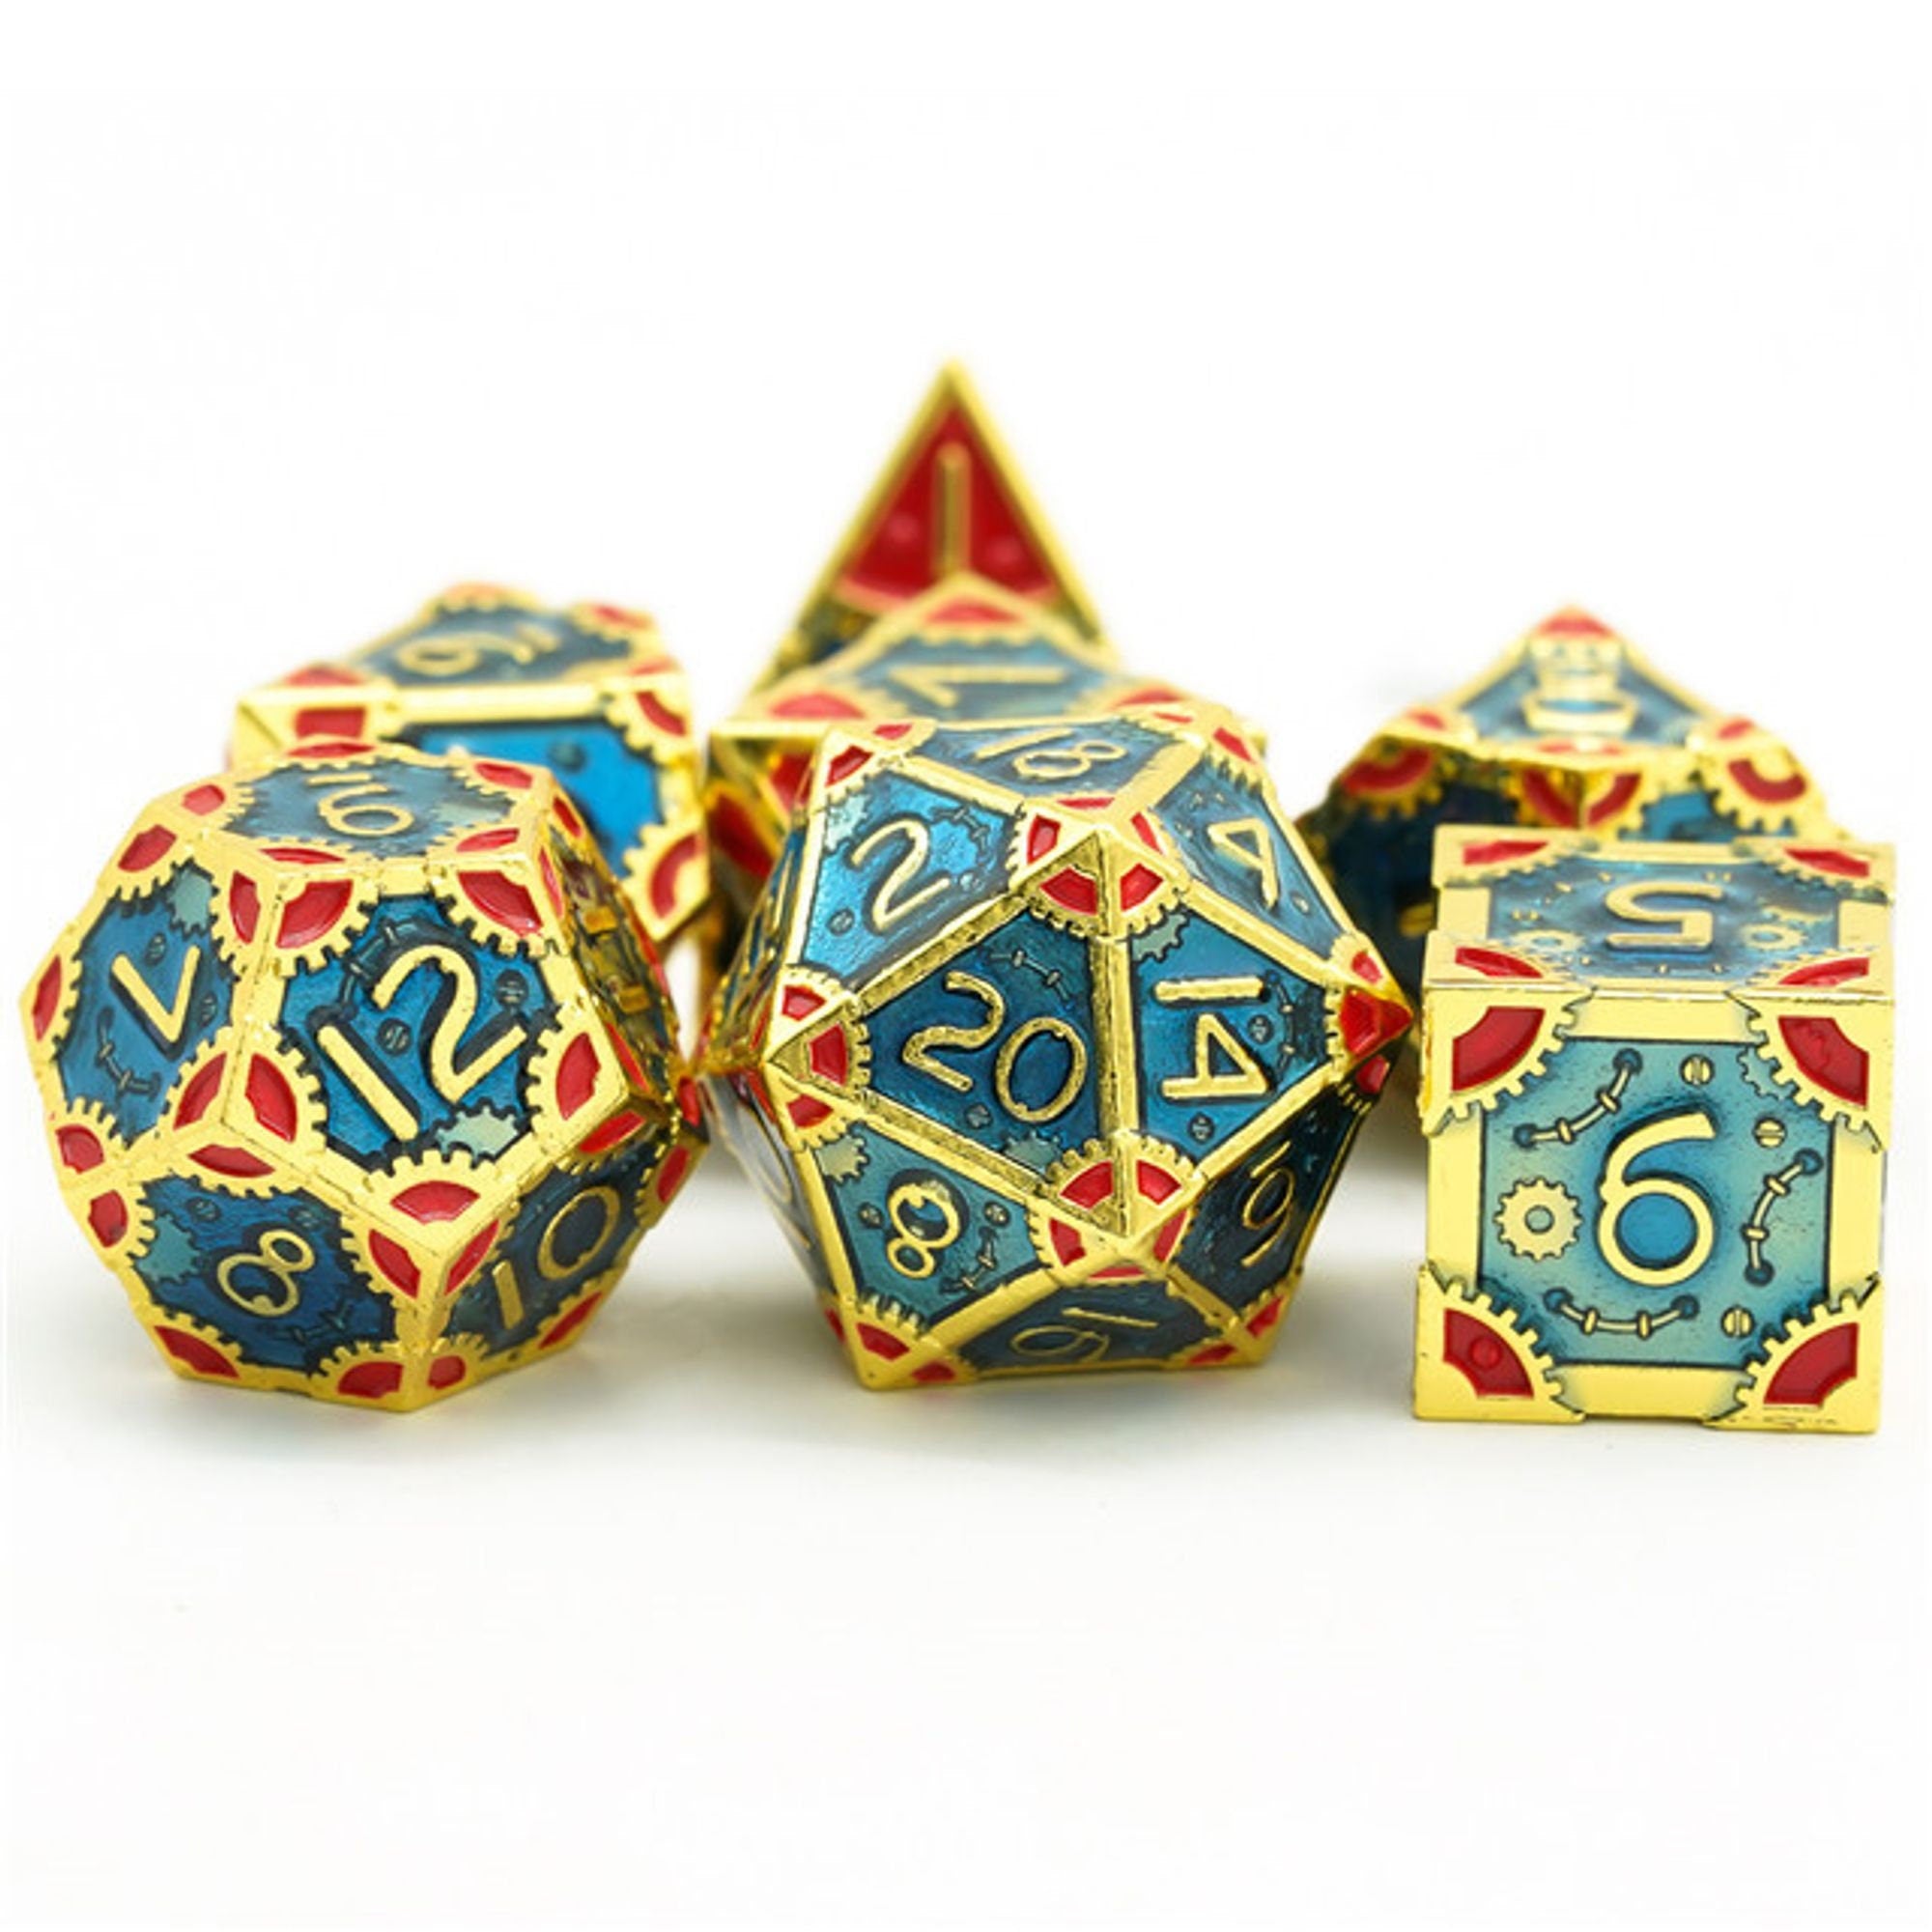 Steampunk Chaos Engine Rich Blue and Red Metal Rogue Style DND/TTRPG Dice set - Dicemaniac